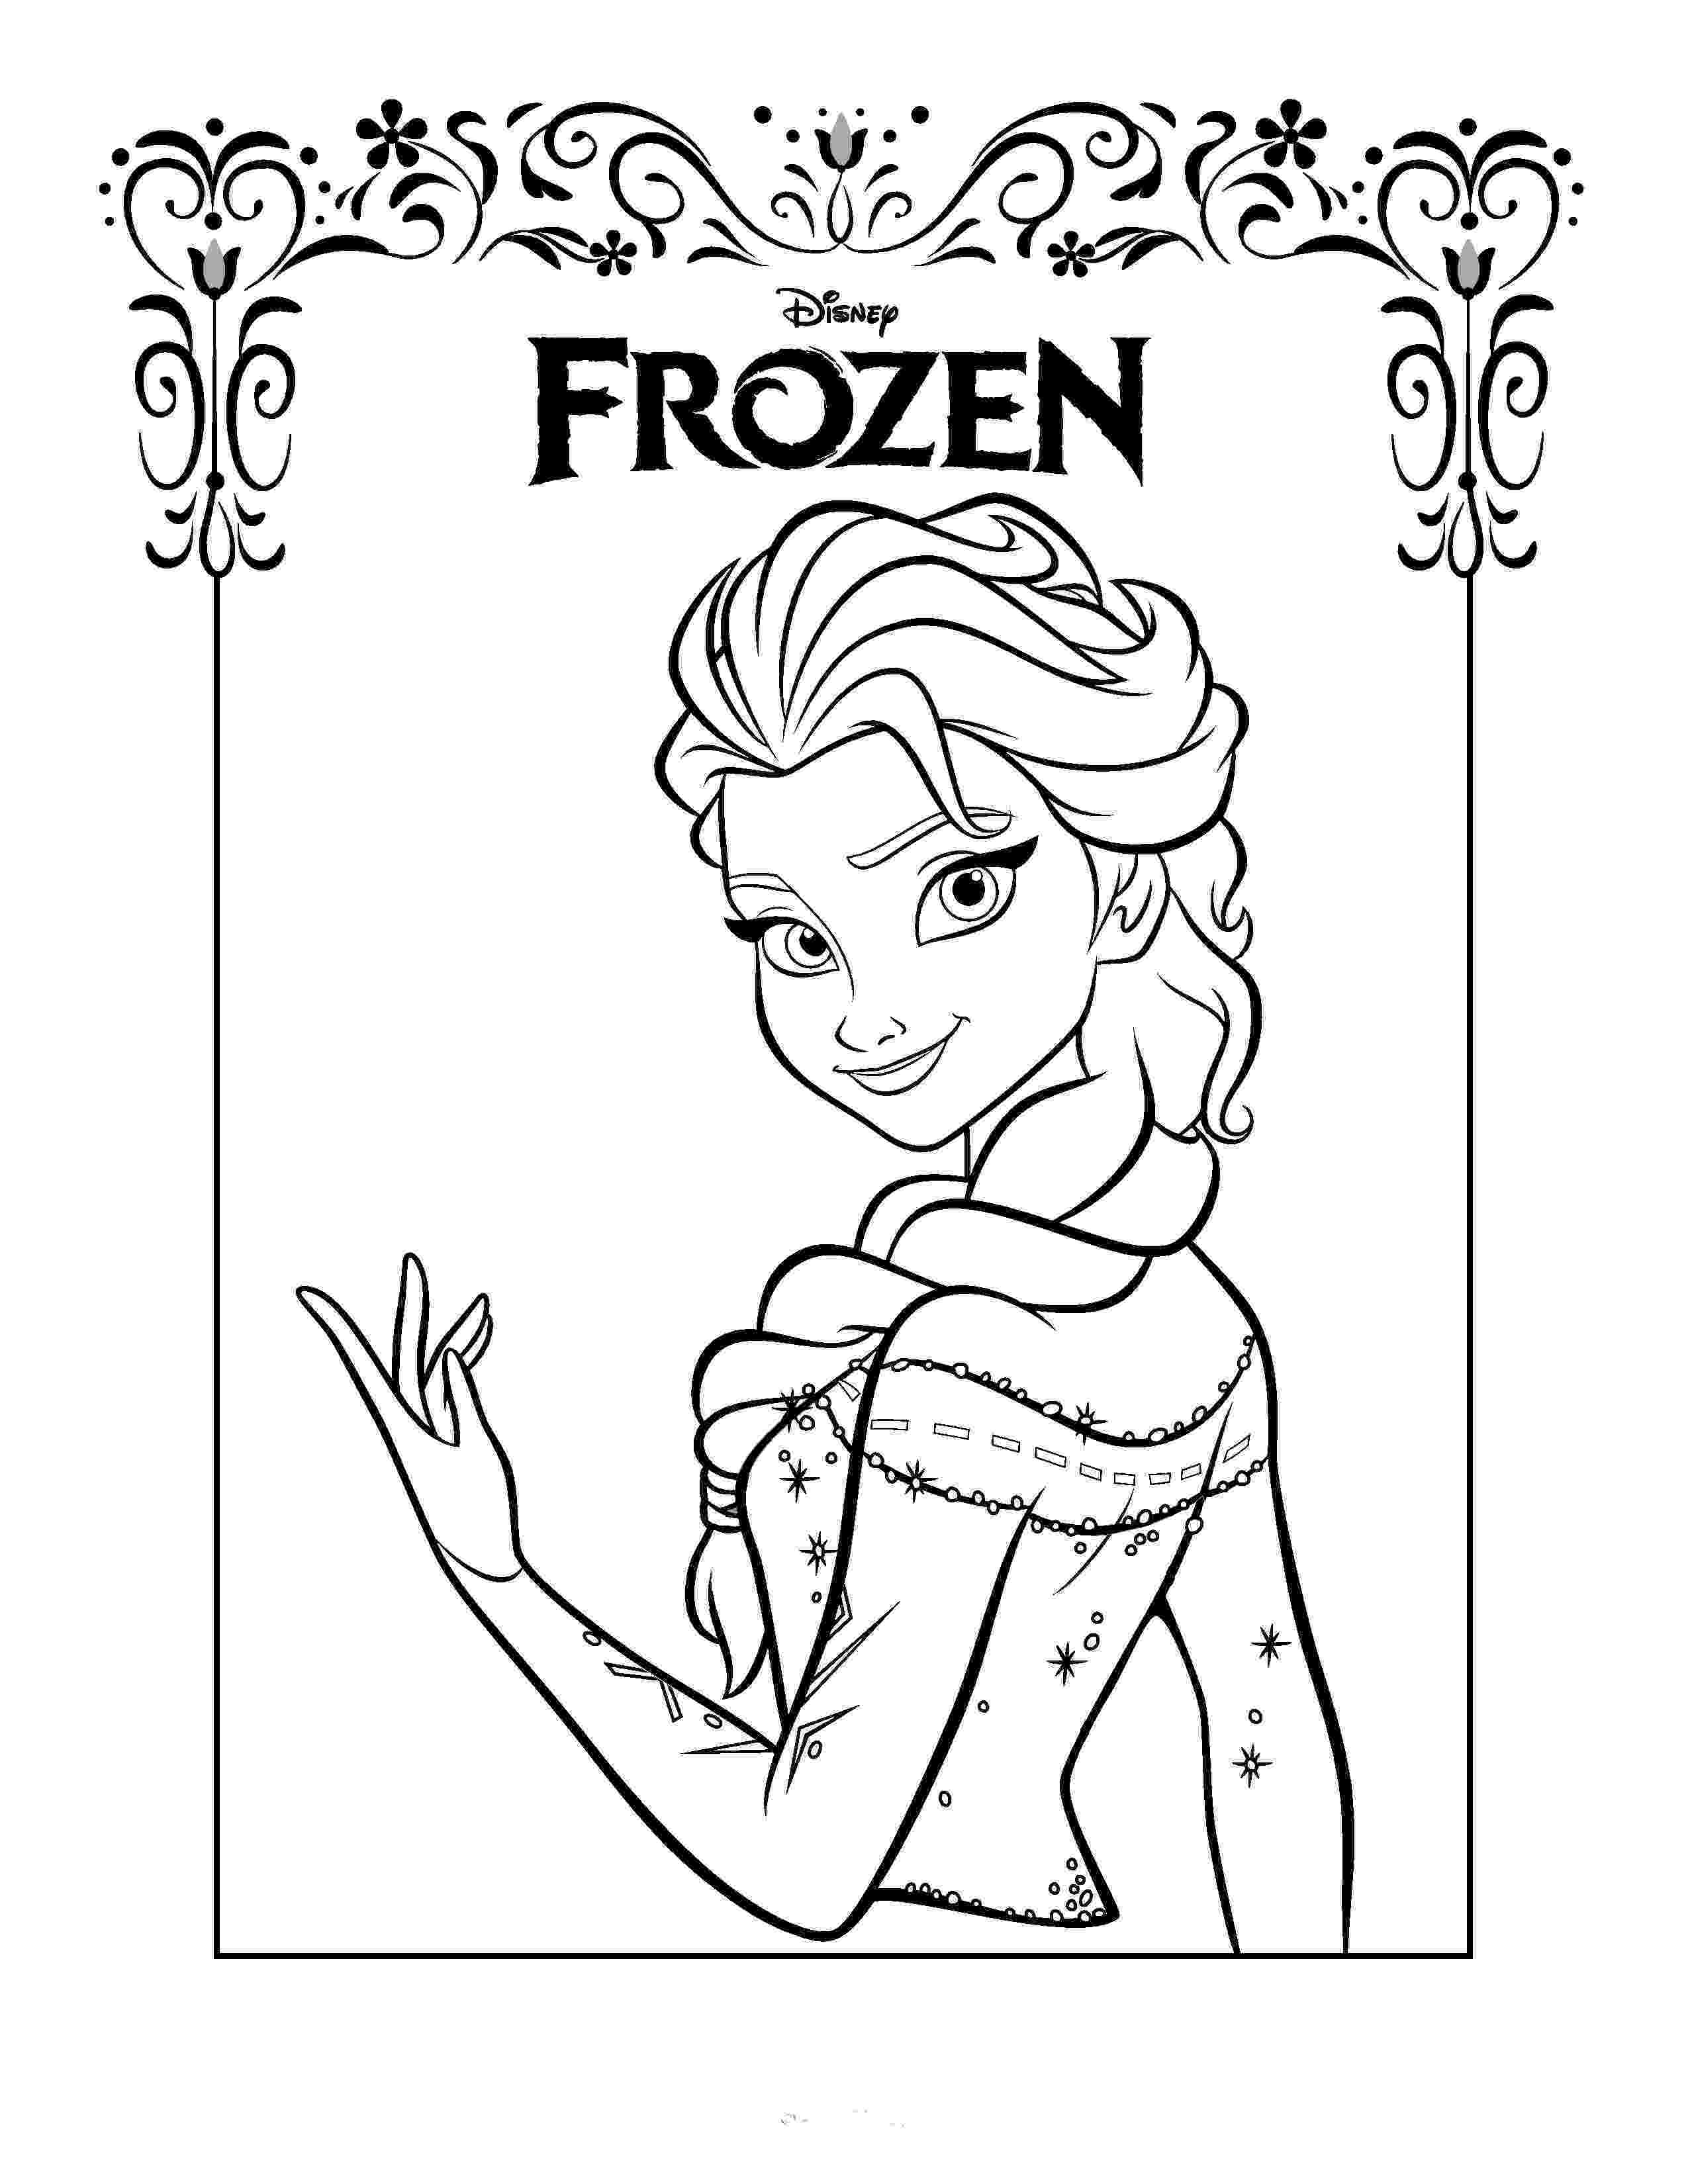 frozen coloring pages free free printable frozen coloring pages for kids best pages frozen free coloring 